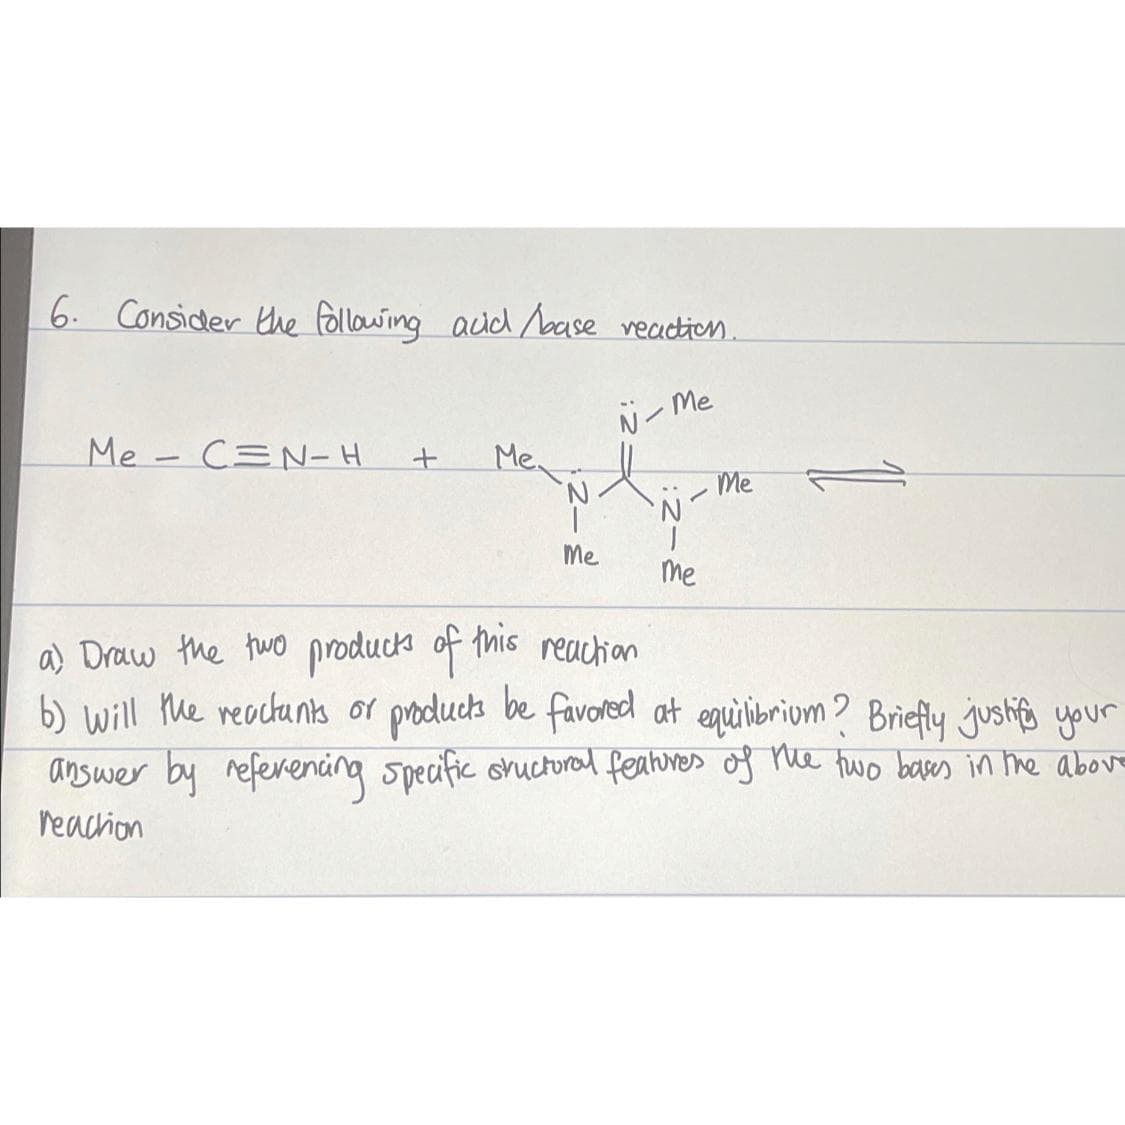 6. Consider the following acid /base reaction.
N-Me
Me CN-H
-
+
Me.
Me
-
N
|
me
Me
a) Draw the two products of this reaction
b) will the reactants or products be favored at equilibrium? Briefly justify your
answer by referencing specific sructural features of the two bases in the above
reaction